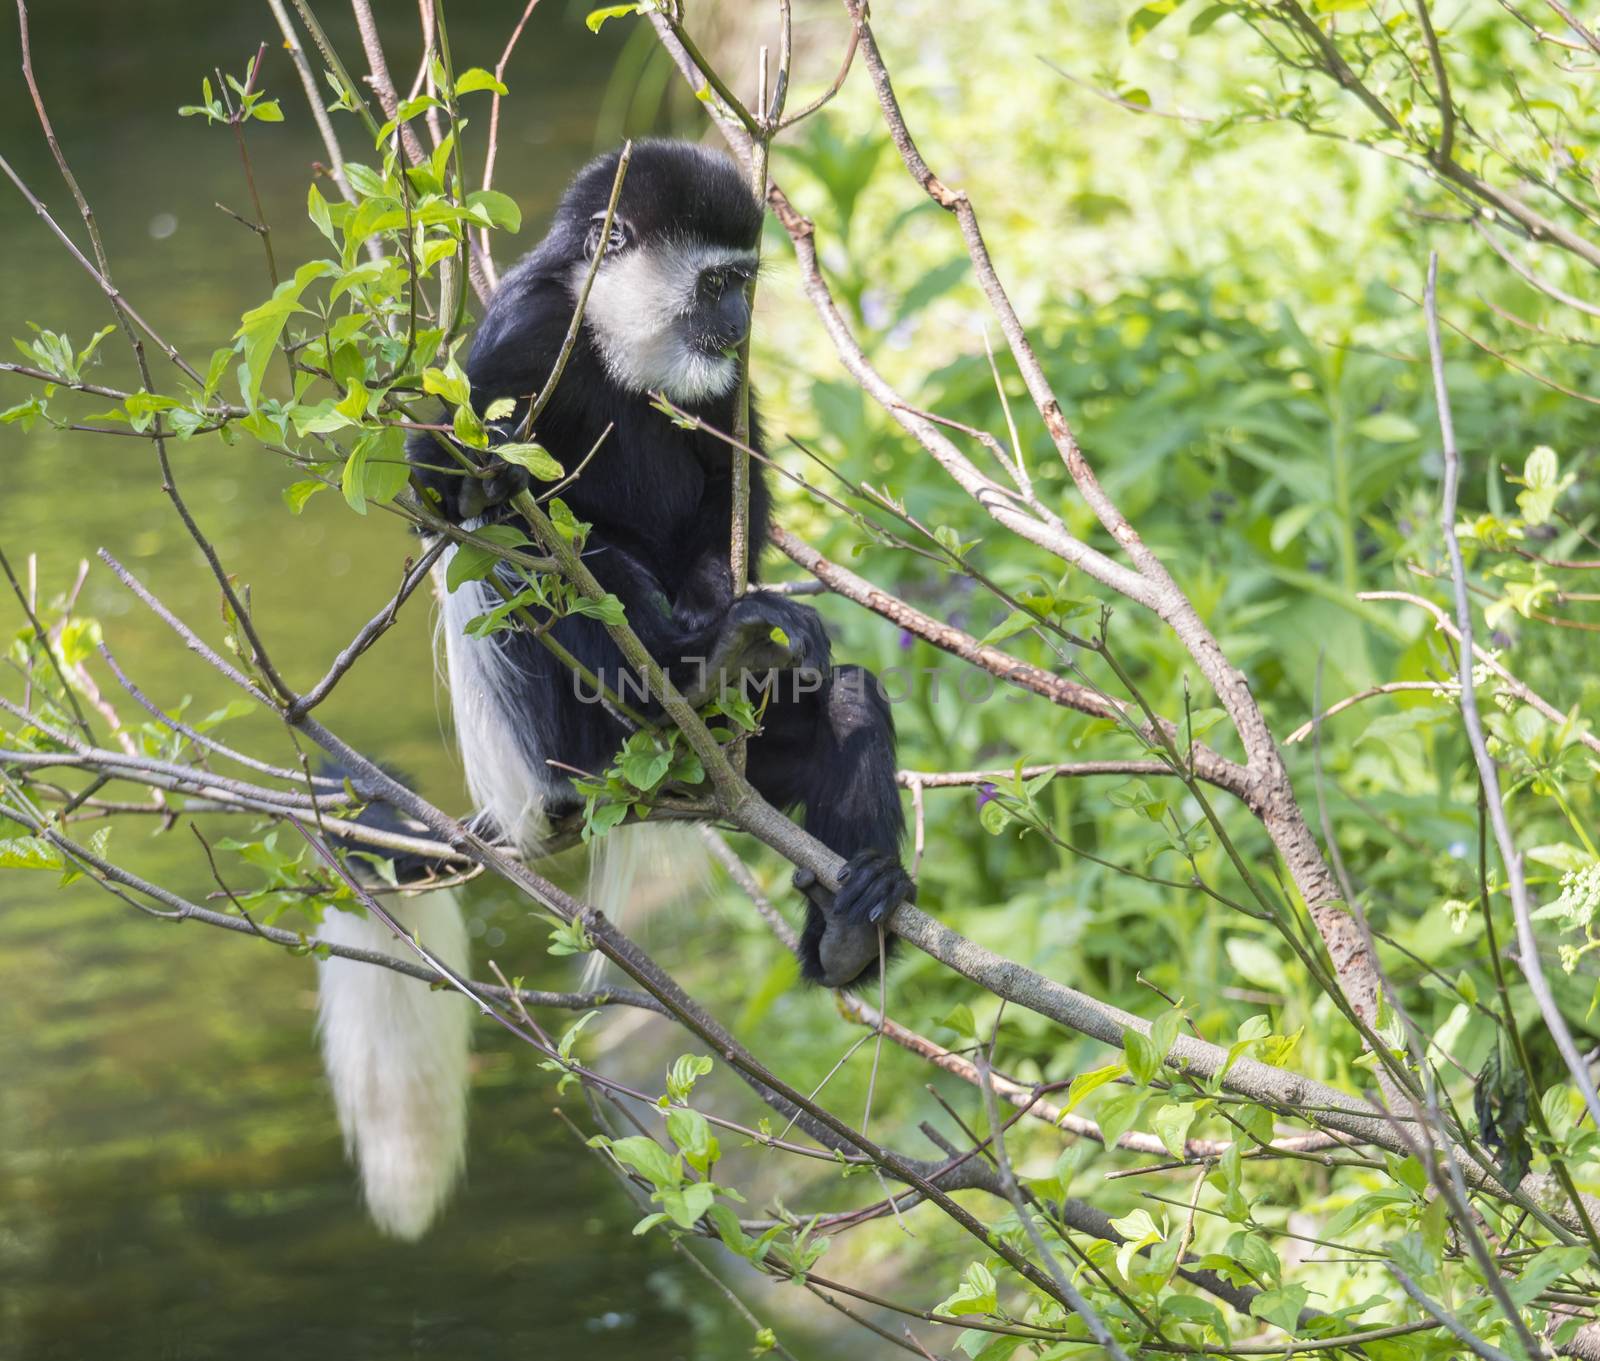 young baby Mantled guereza monkey also named Colobus guereza eating tree leaves, climbing tree branch over the water, natural sunlight, copy space by Henkeova